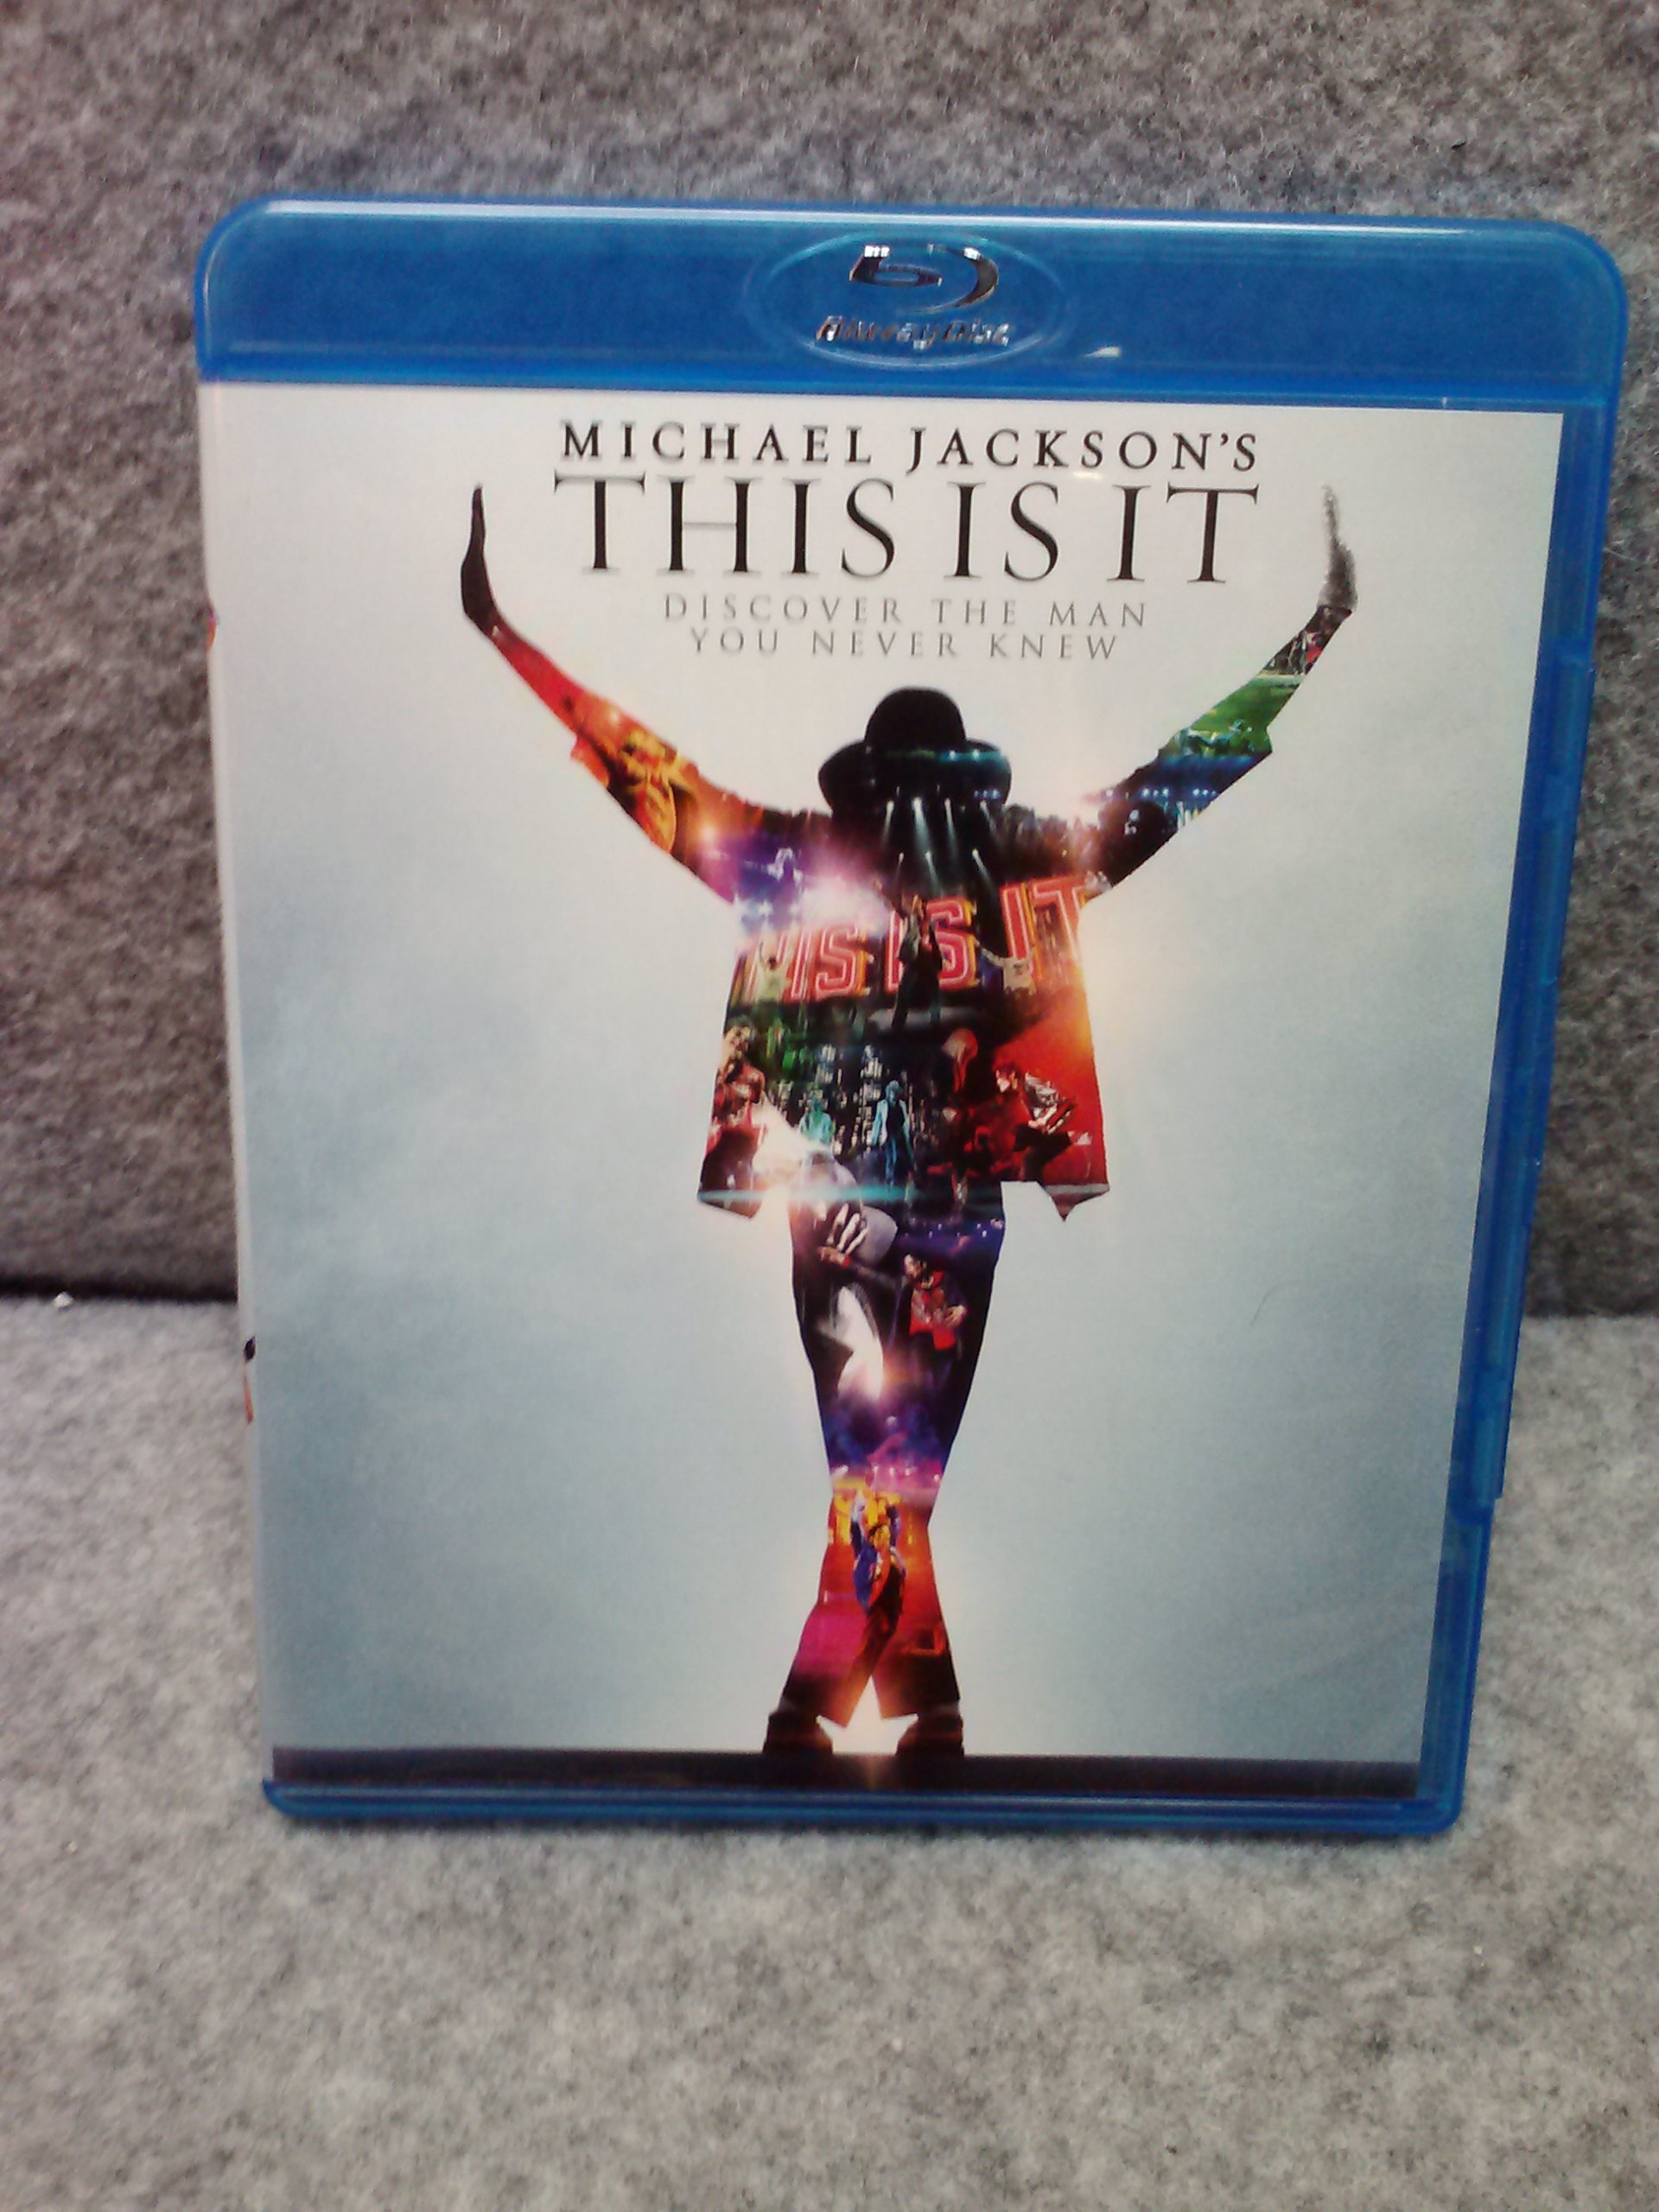 MICHAEL JACKSON’S THIS IS IT on MovieShack